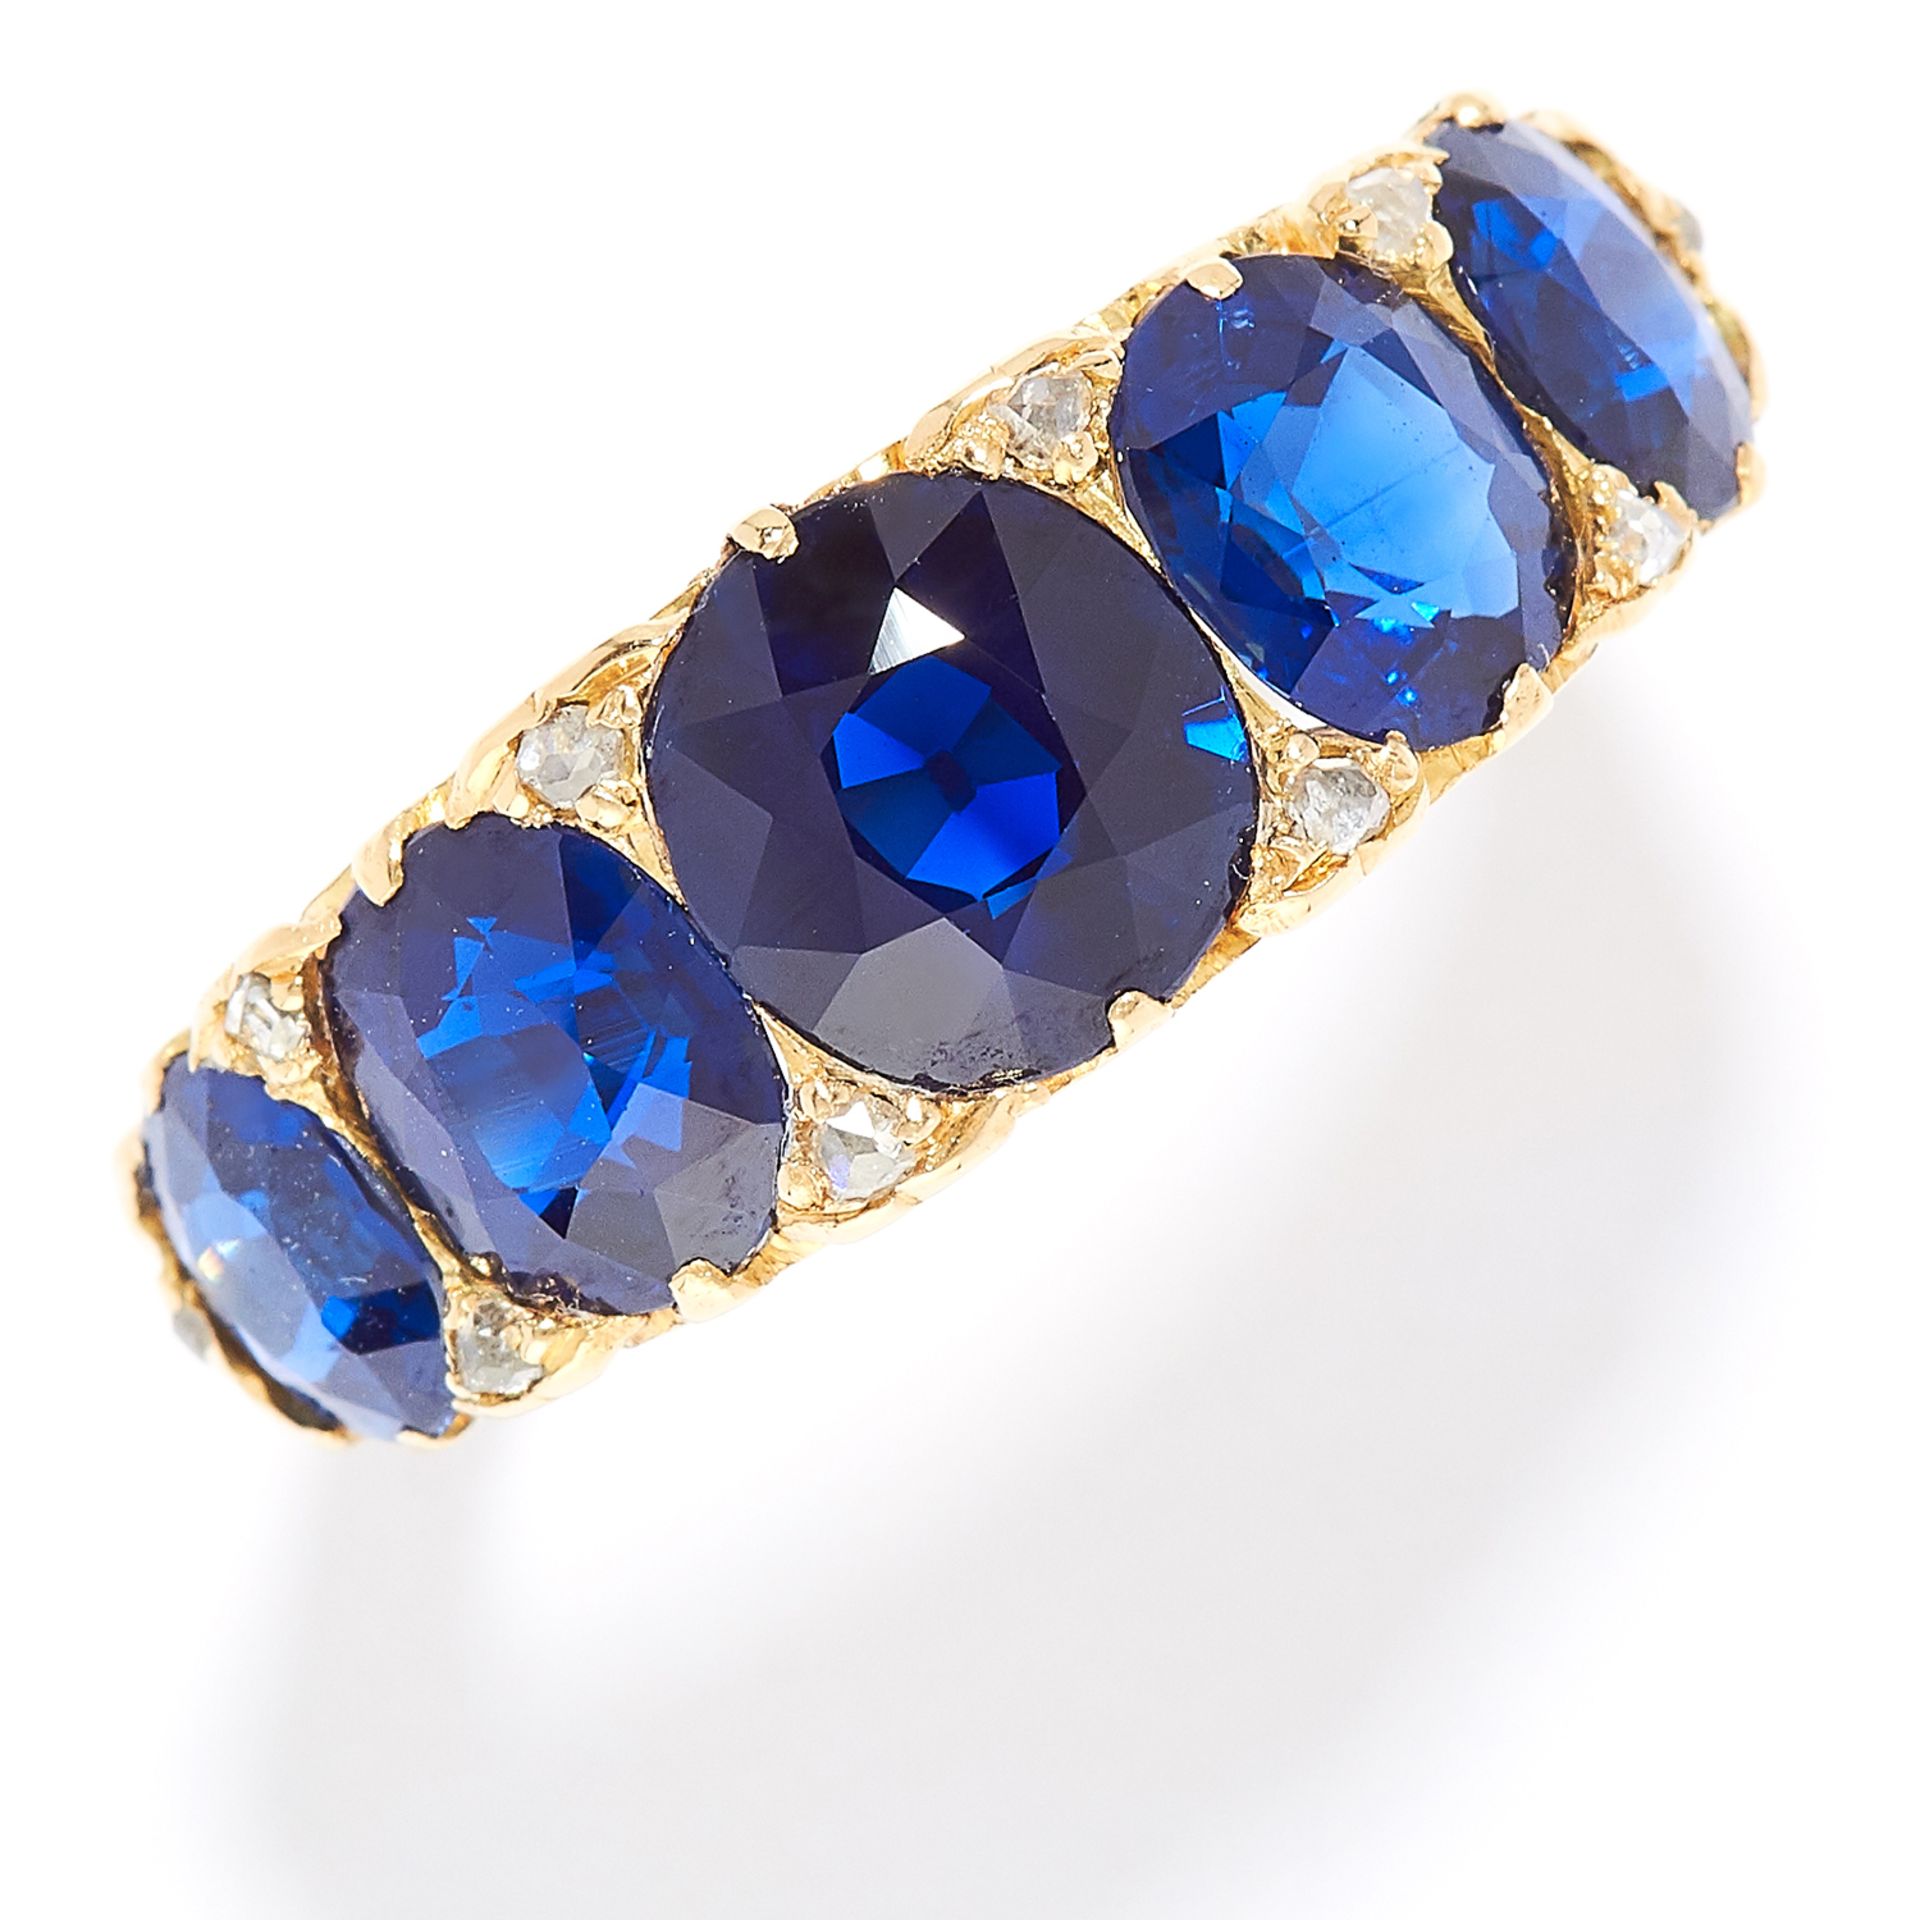 ANTIQUE BURMA NO HEAT SAPPHIRE AND DIAMOND RING, LATE 19TH CENTURY in high carat yellow gold, set